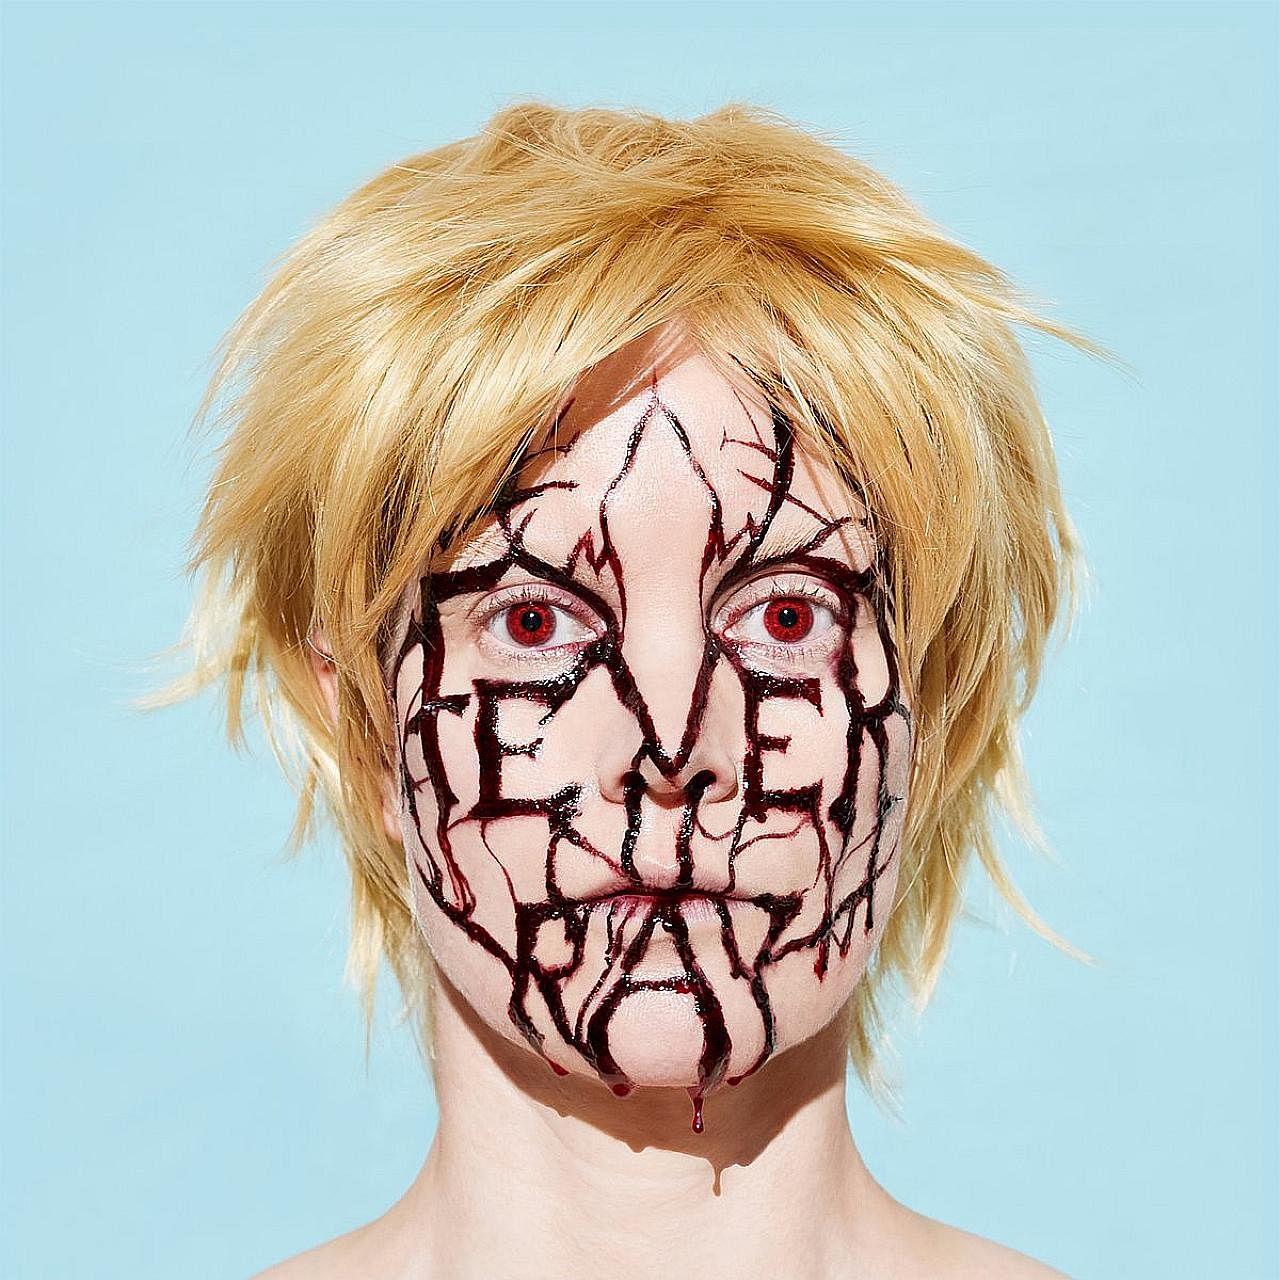 Karin Dreijer, from the mysterious Swedish electronic sibling duo The Knife, releases Plunge, her second album as Fever Ray.